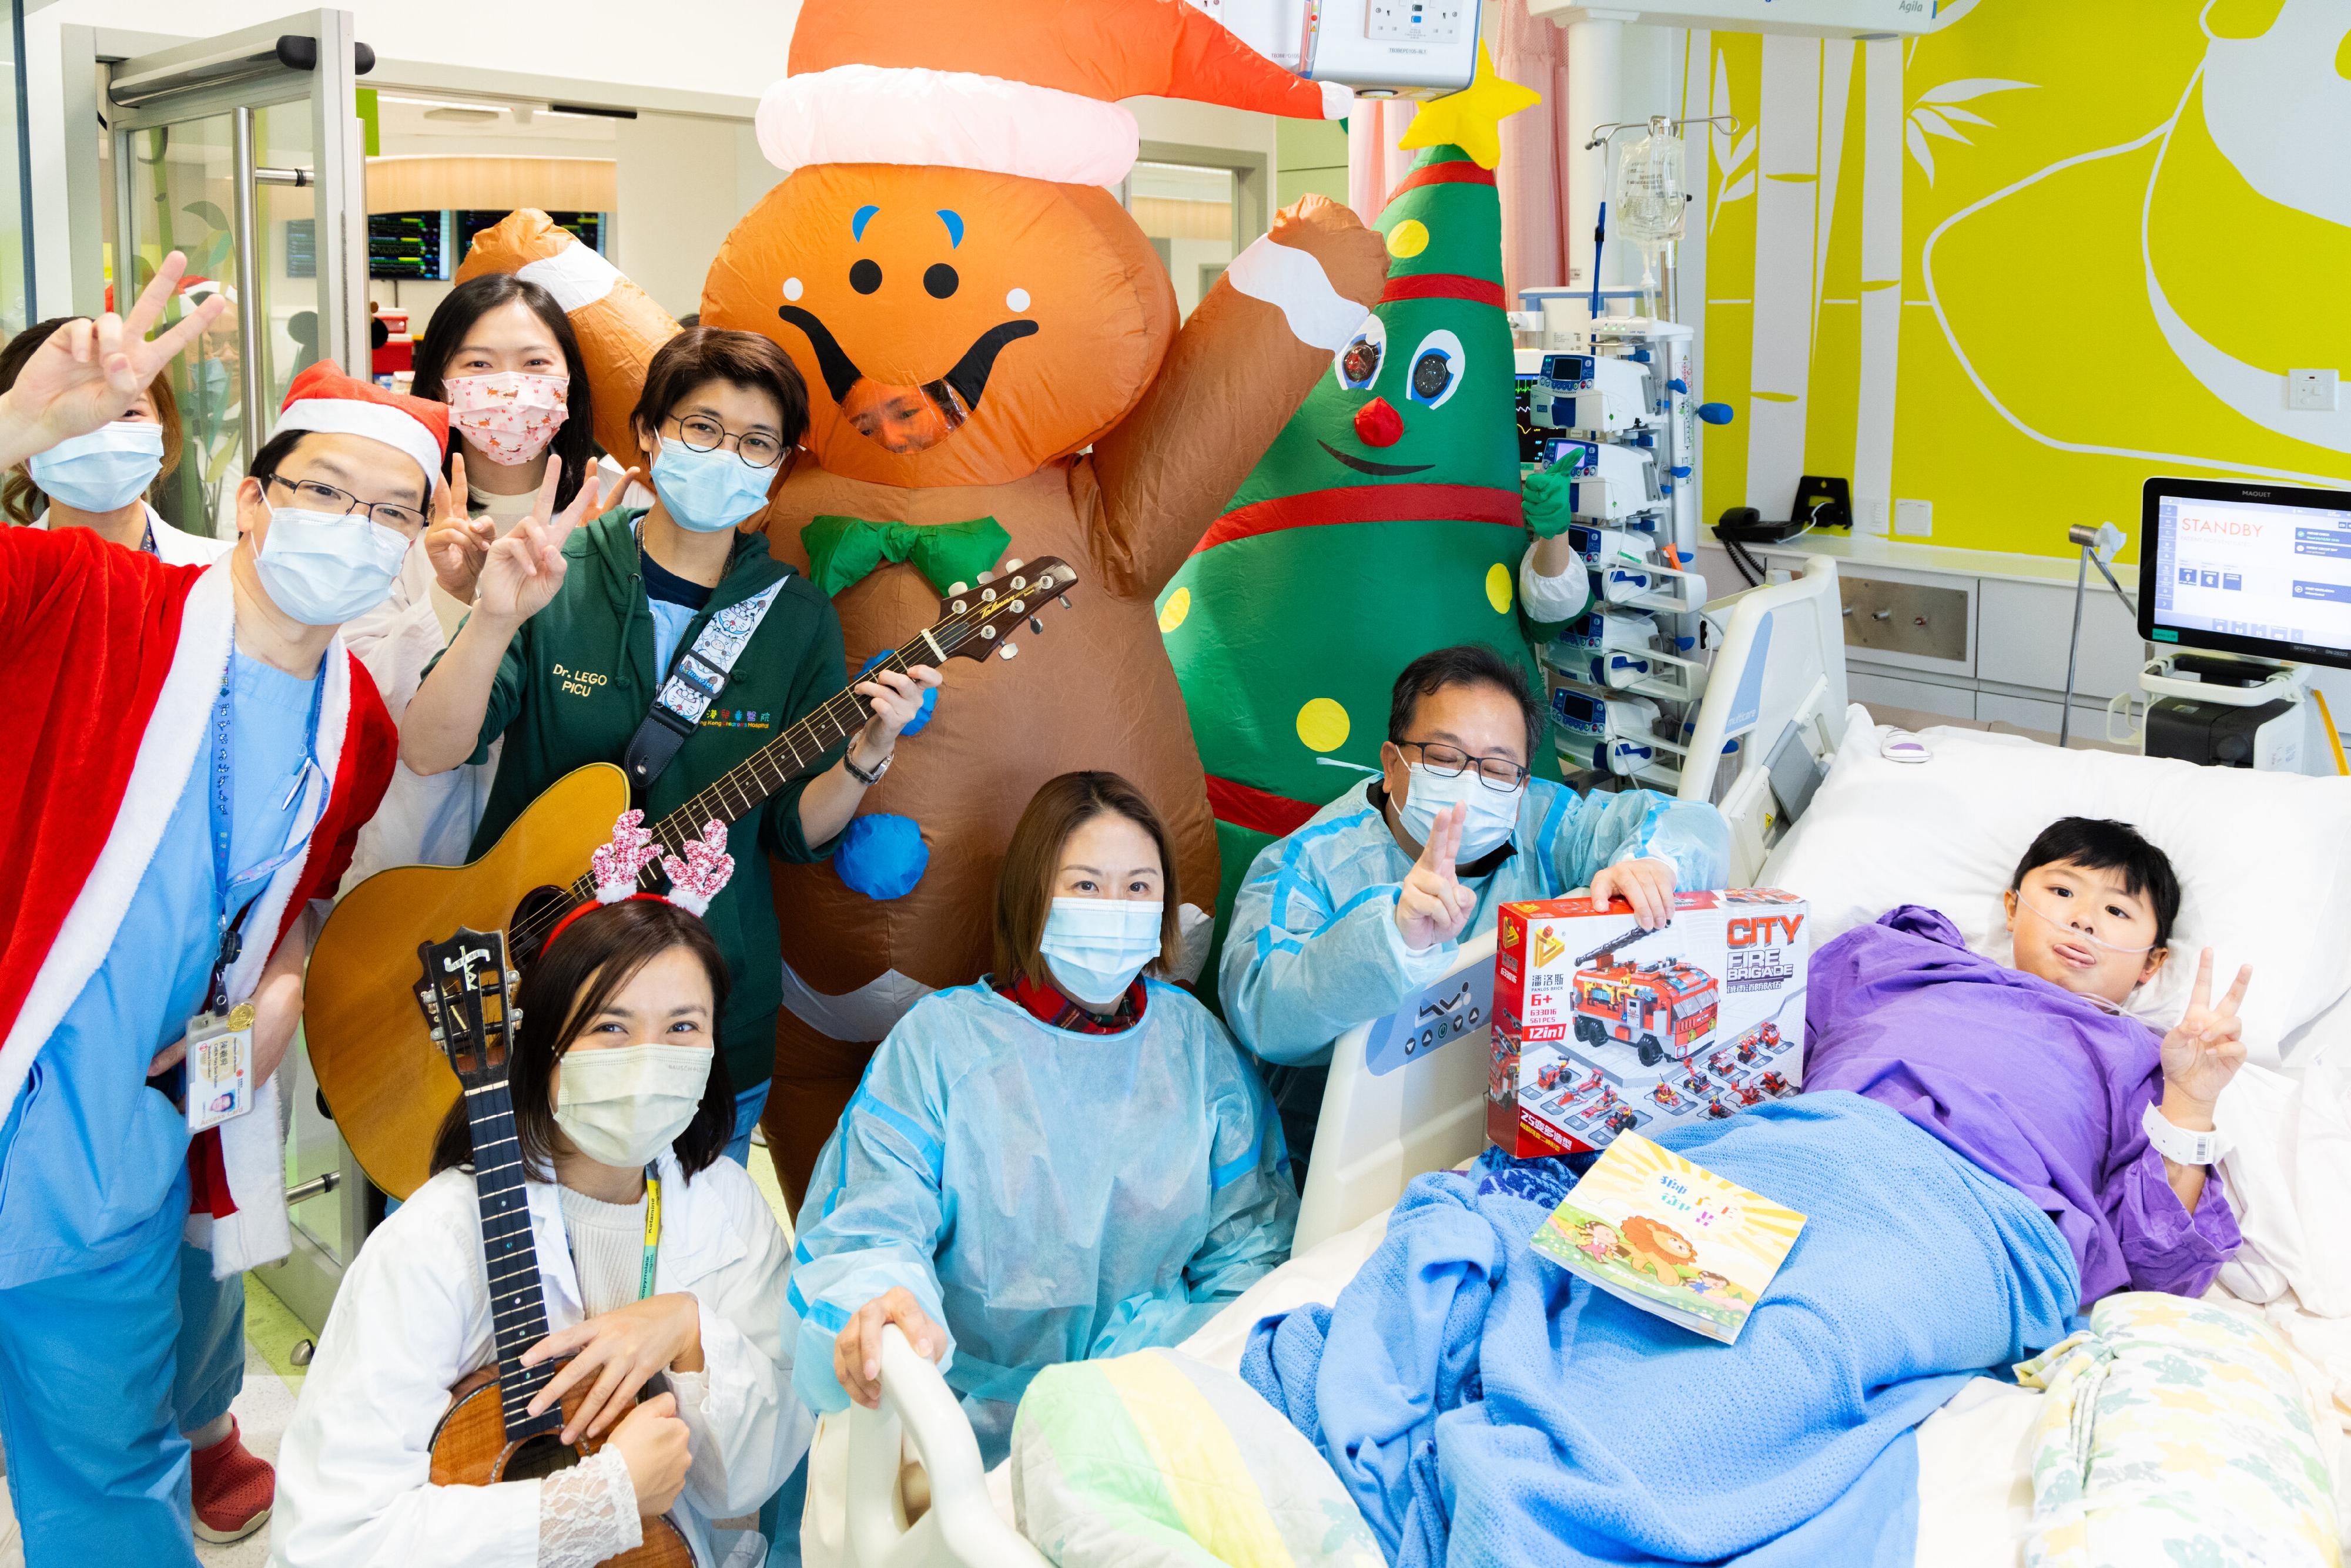 On Christmas day, a group of the Hong Kong Children's Hospital healthcare staff dressed up and brightened up the wards with Christmas carols and surprise gifts to send blessings to children and parents.
